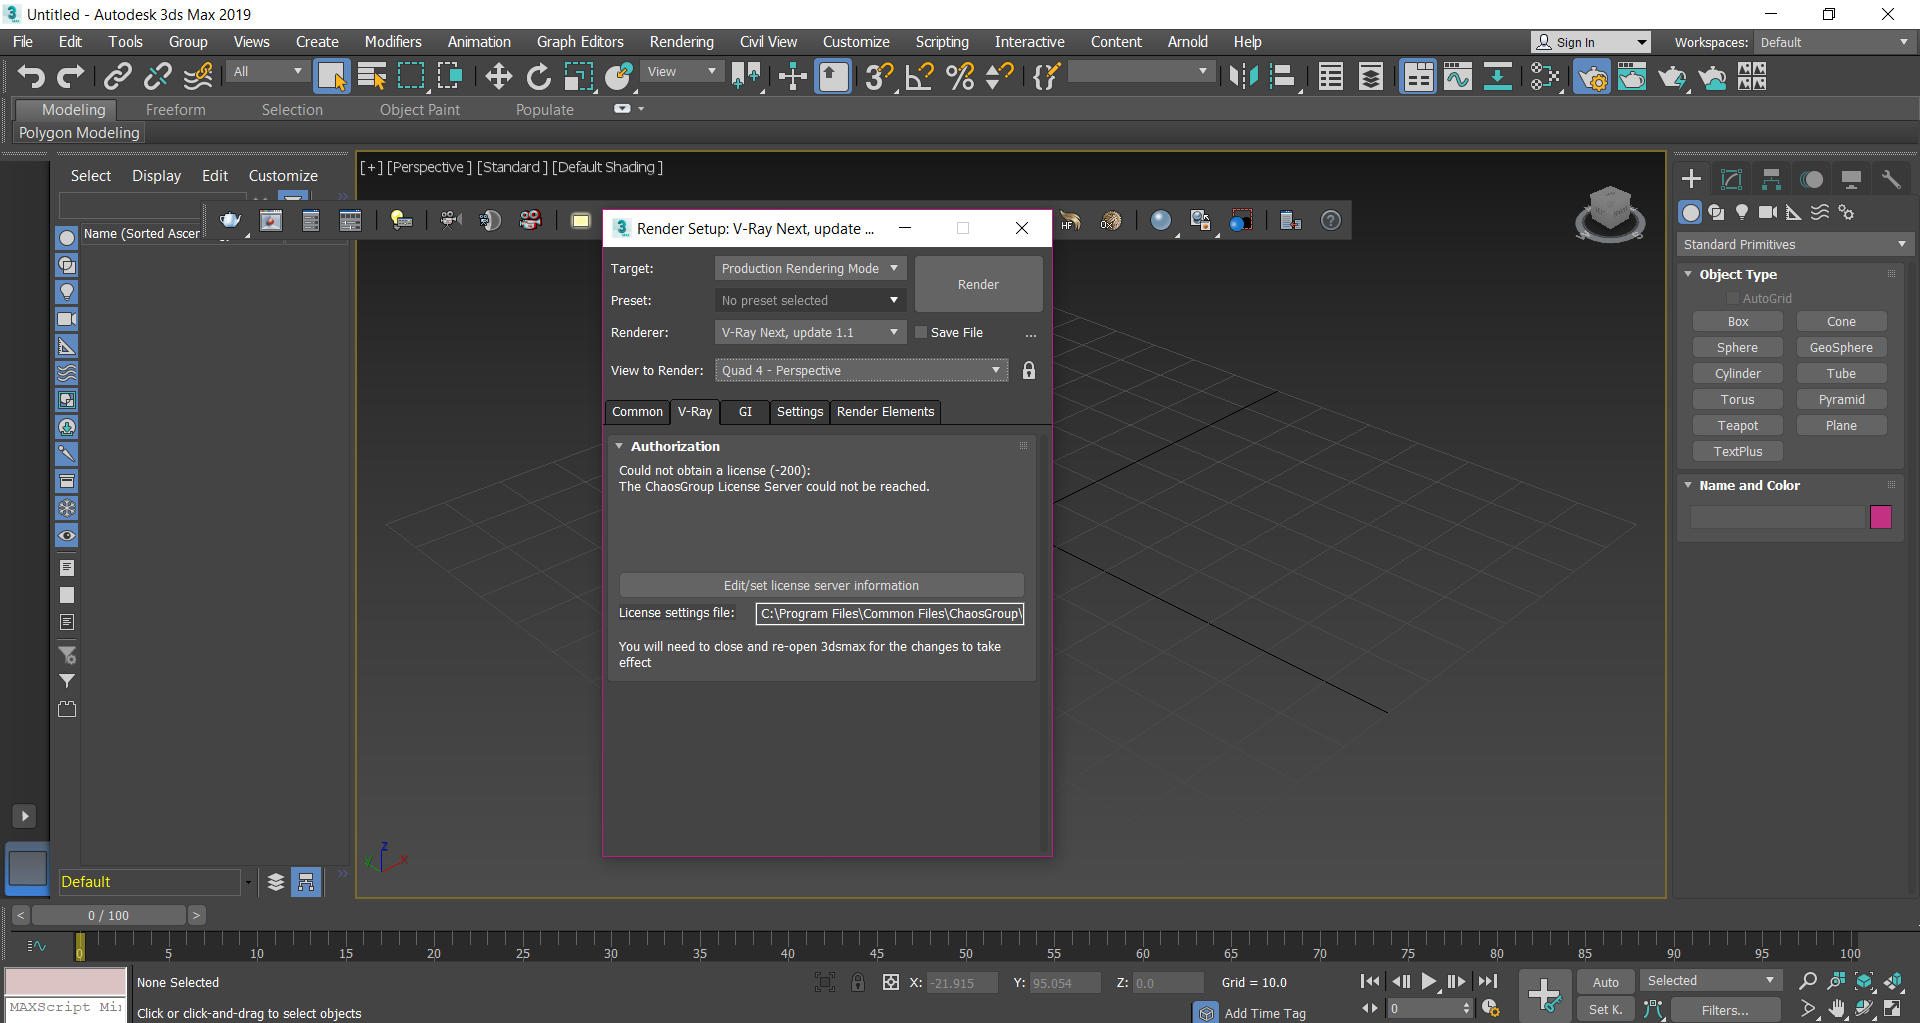 Solved: vray next Didn't work on 3Ds MAX 2019 - Autodesk Community - 3ds Max